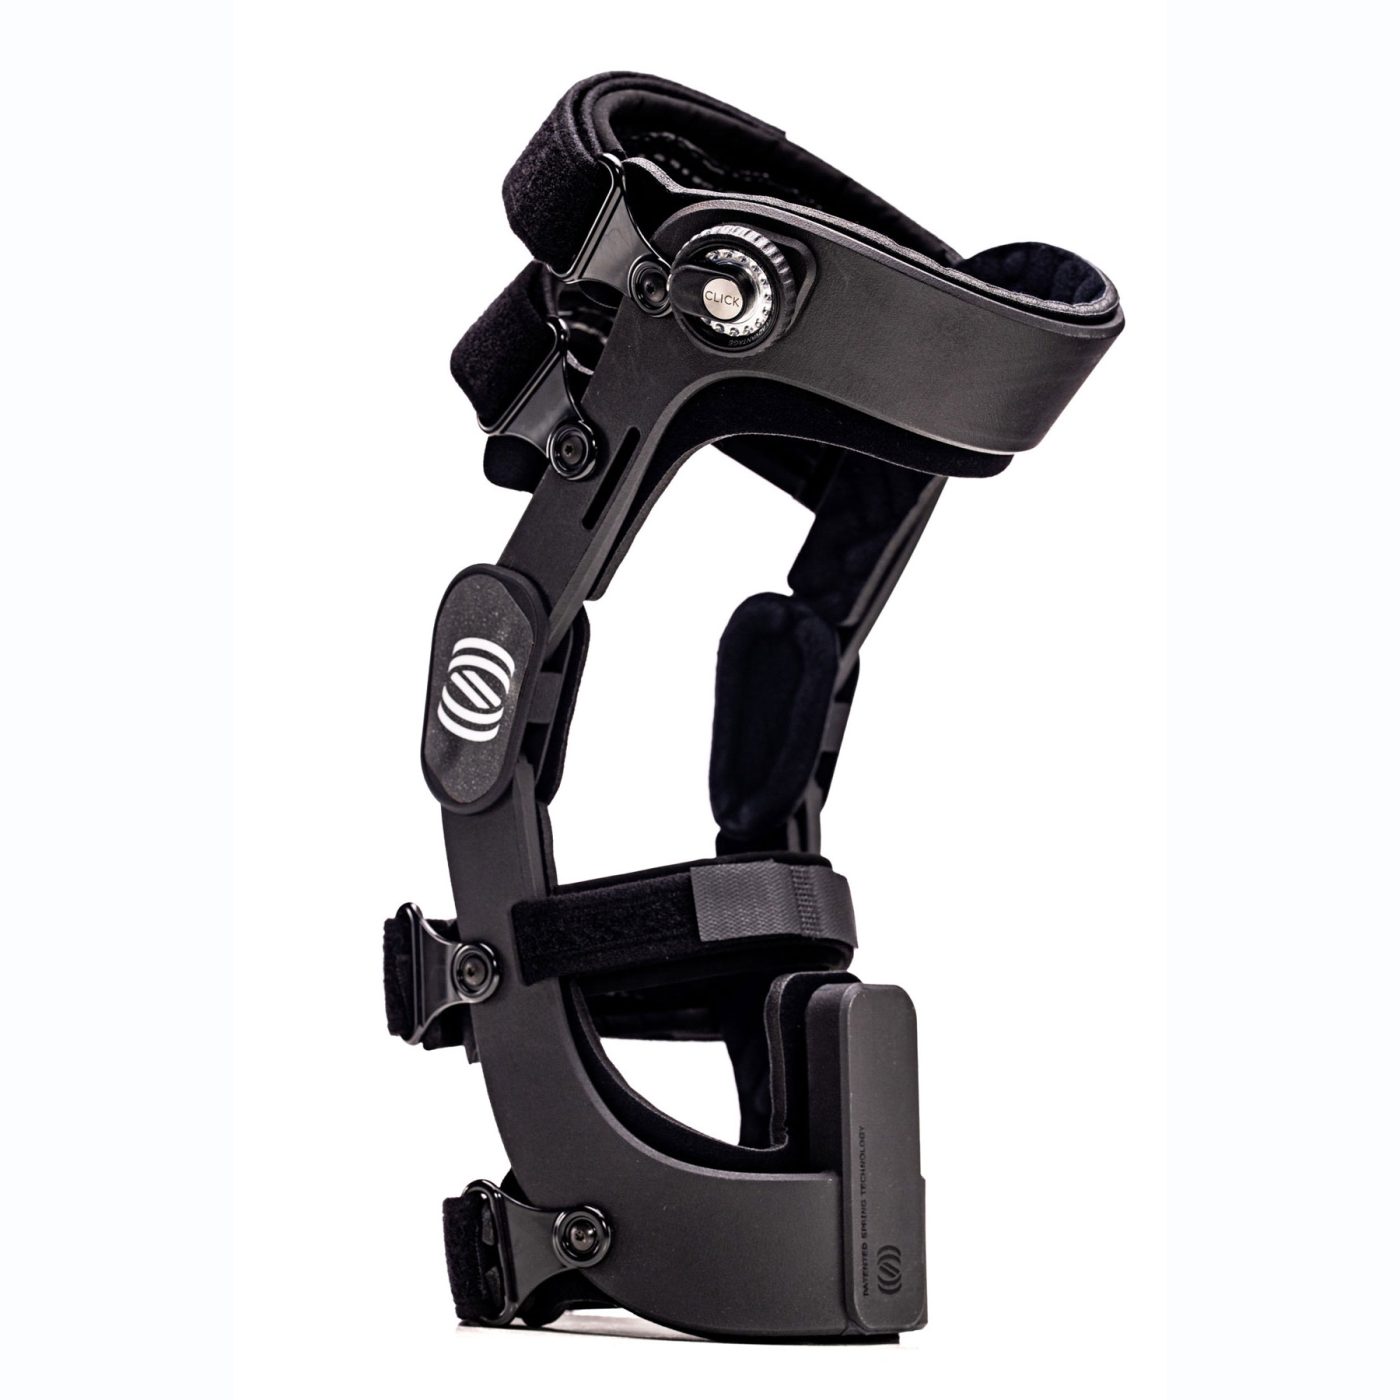 Spring Loaded knee brace in black with a white background.